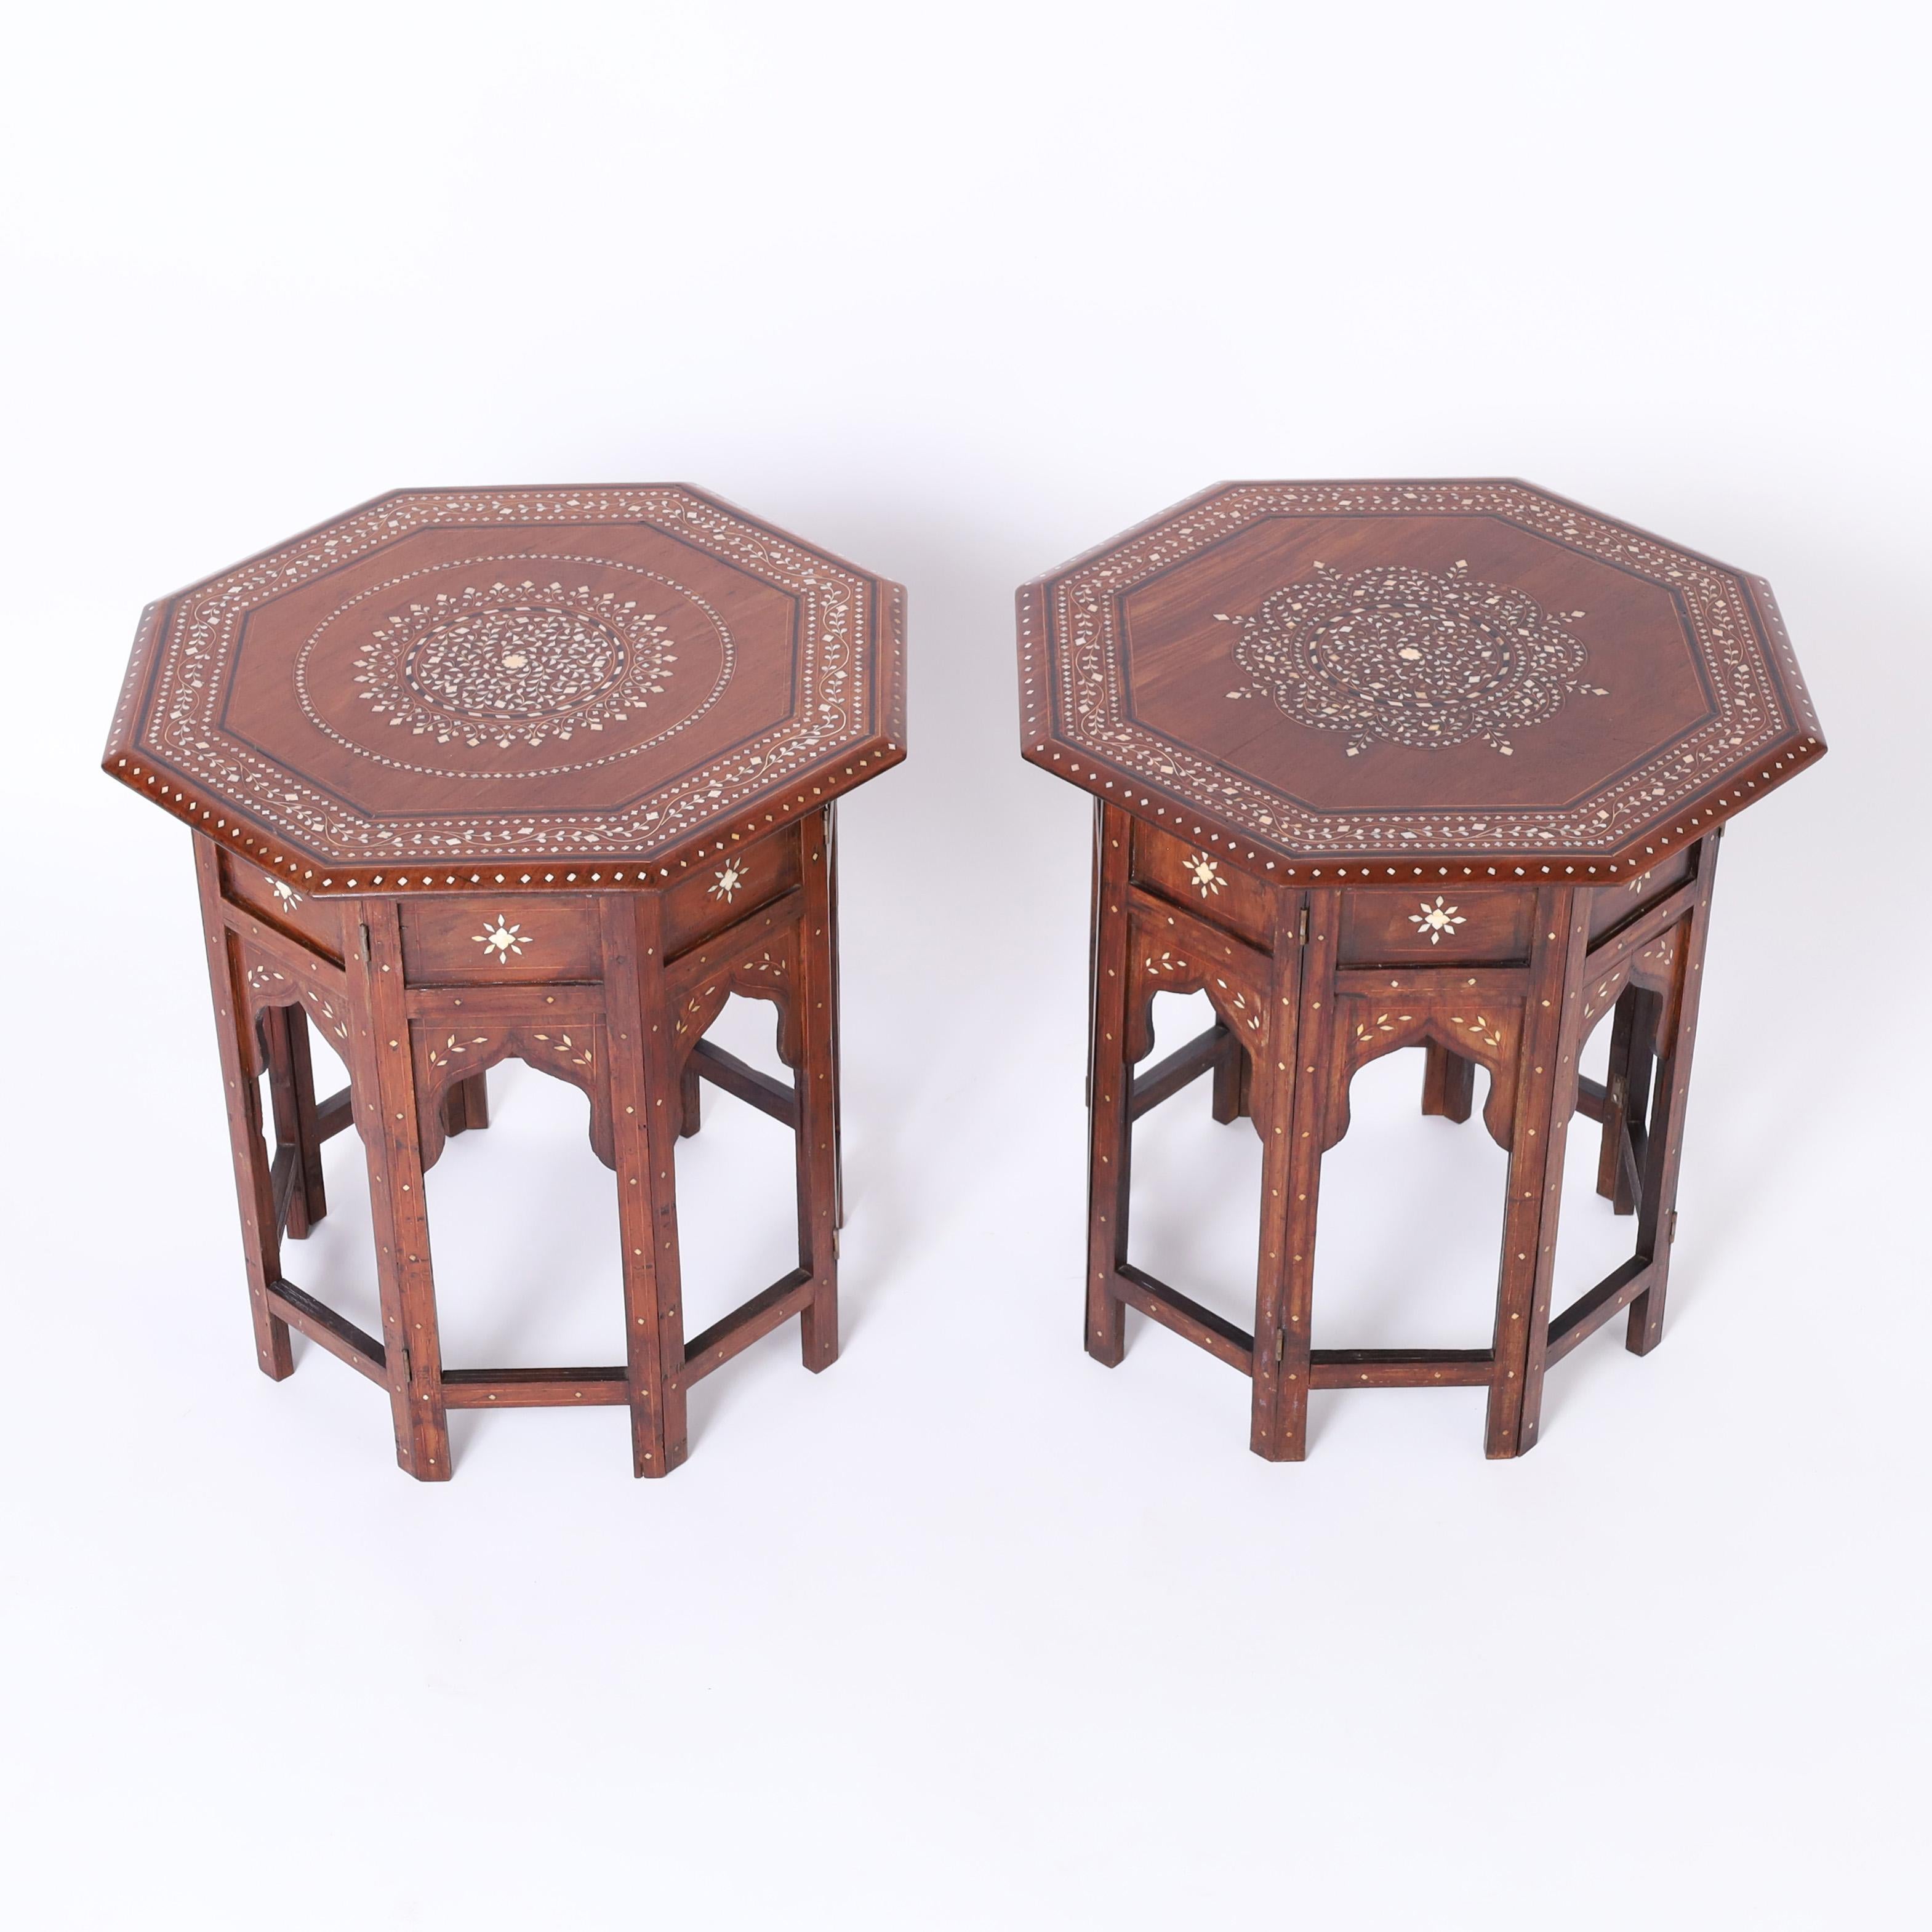 Intriguing pair of Moroccan stands crafted in mahogany having octagon tops inlaid with bone in floral patterns highlighted in ebony and kingwood on eight sided bases with bone inlays and moorish arches. 